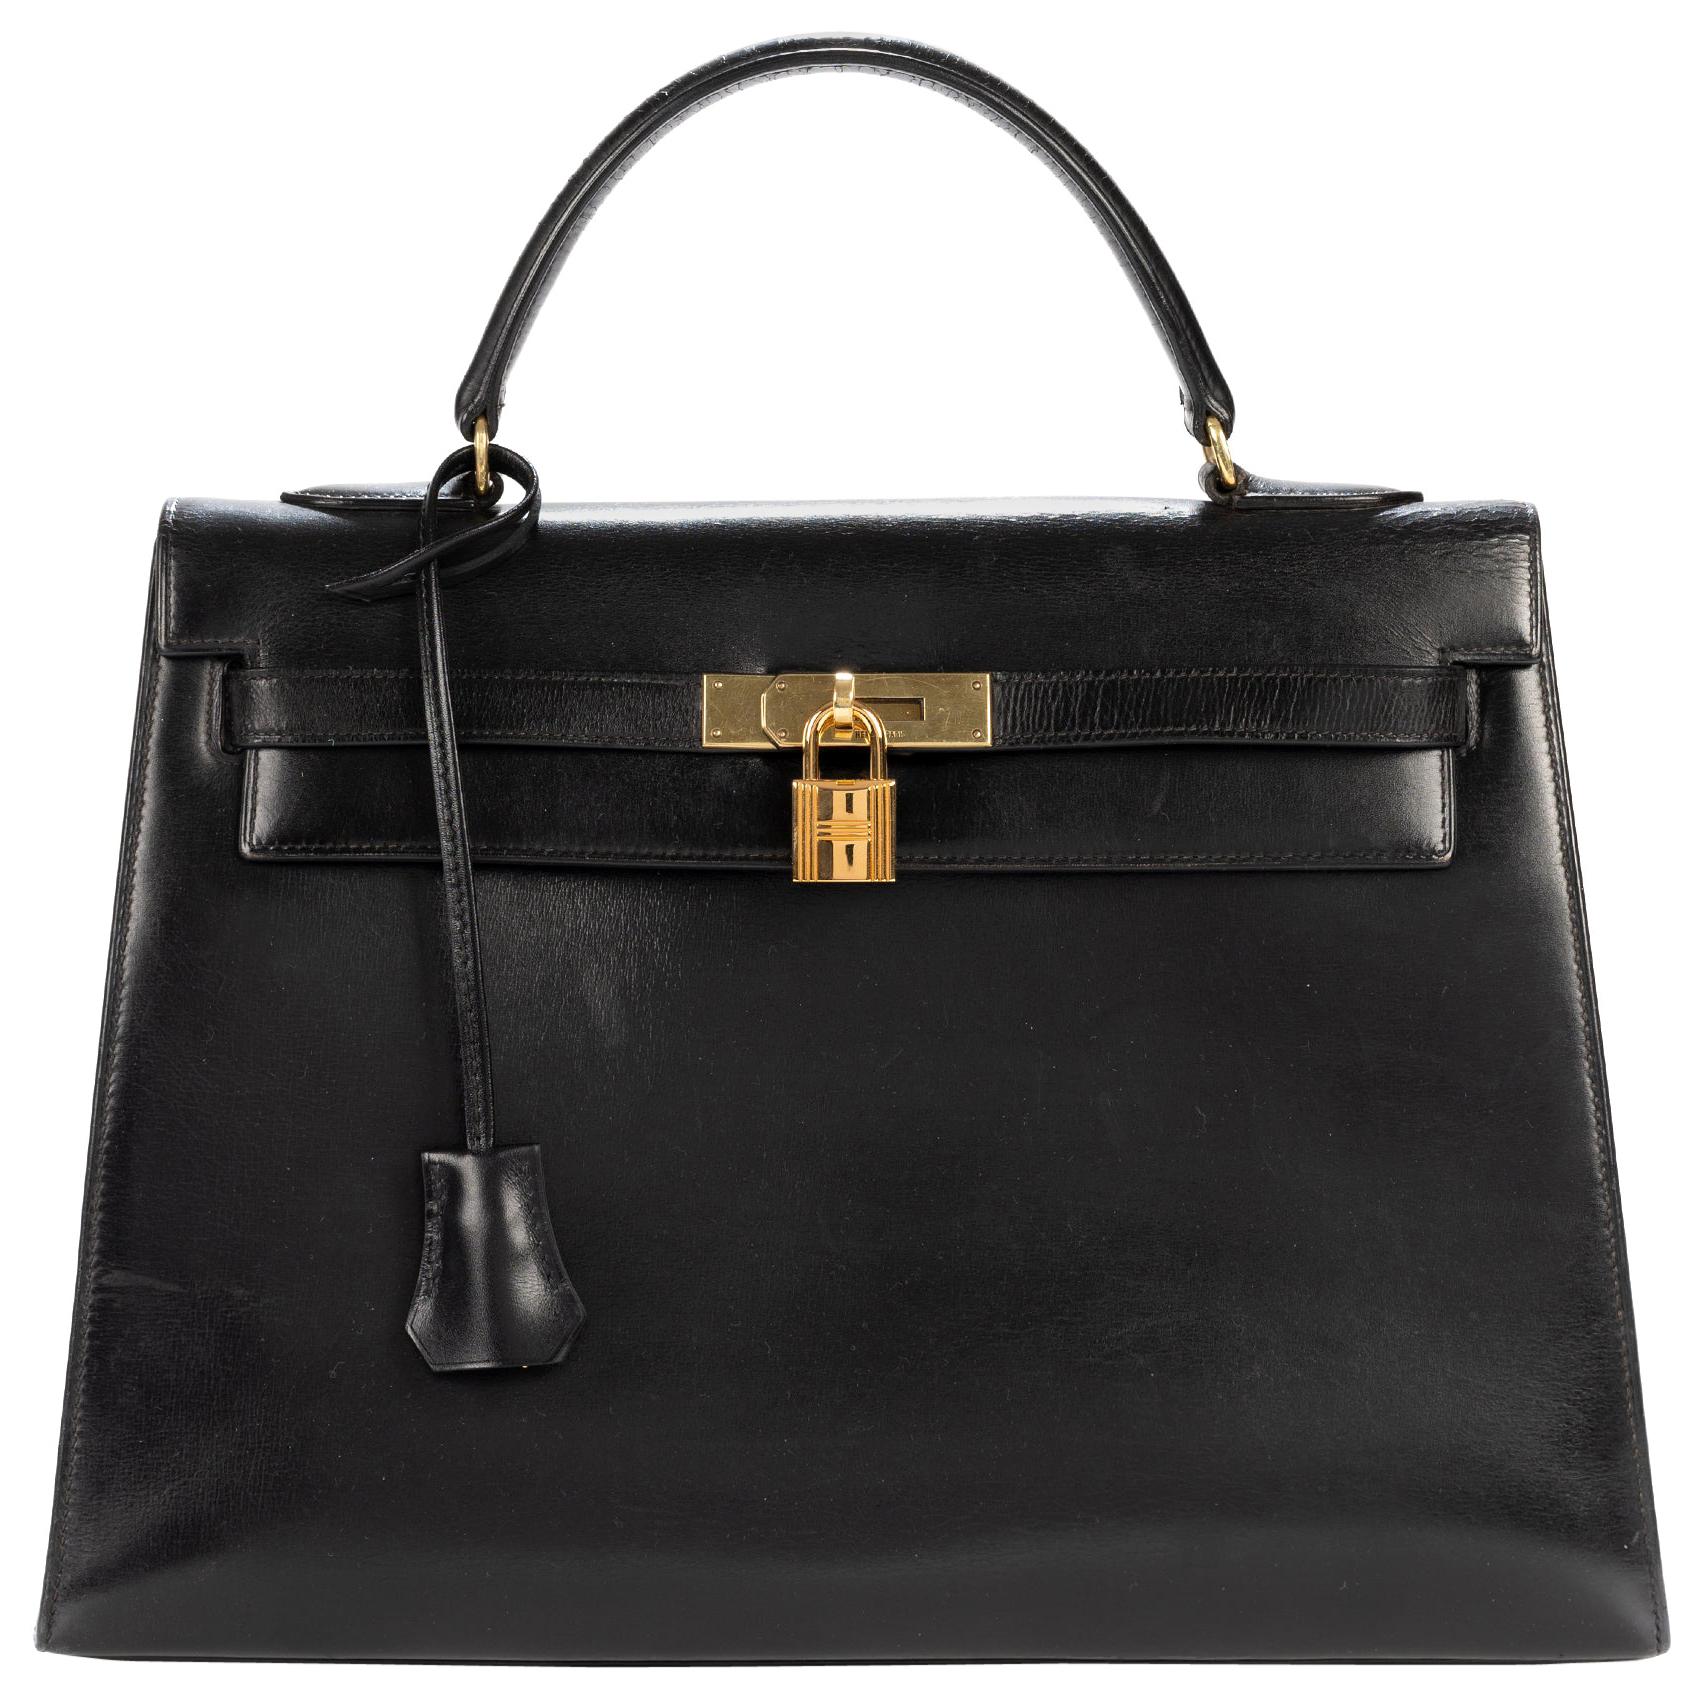 Hermès Kelly 32 sellier in black calfskin with gold hardware!